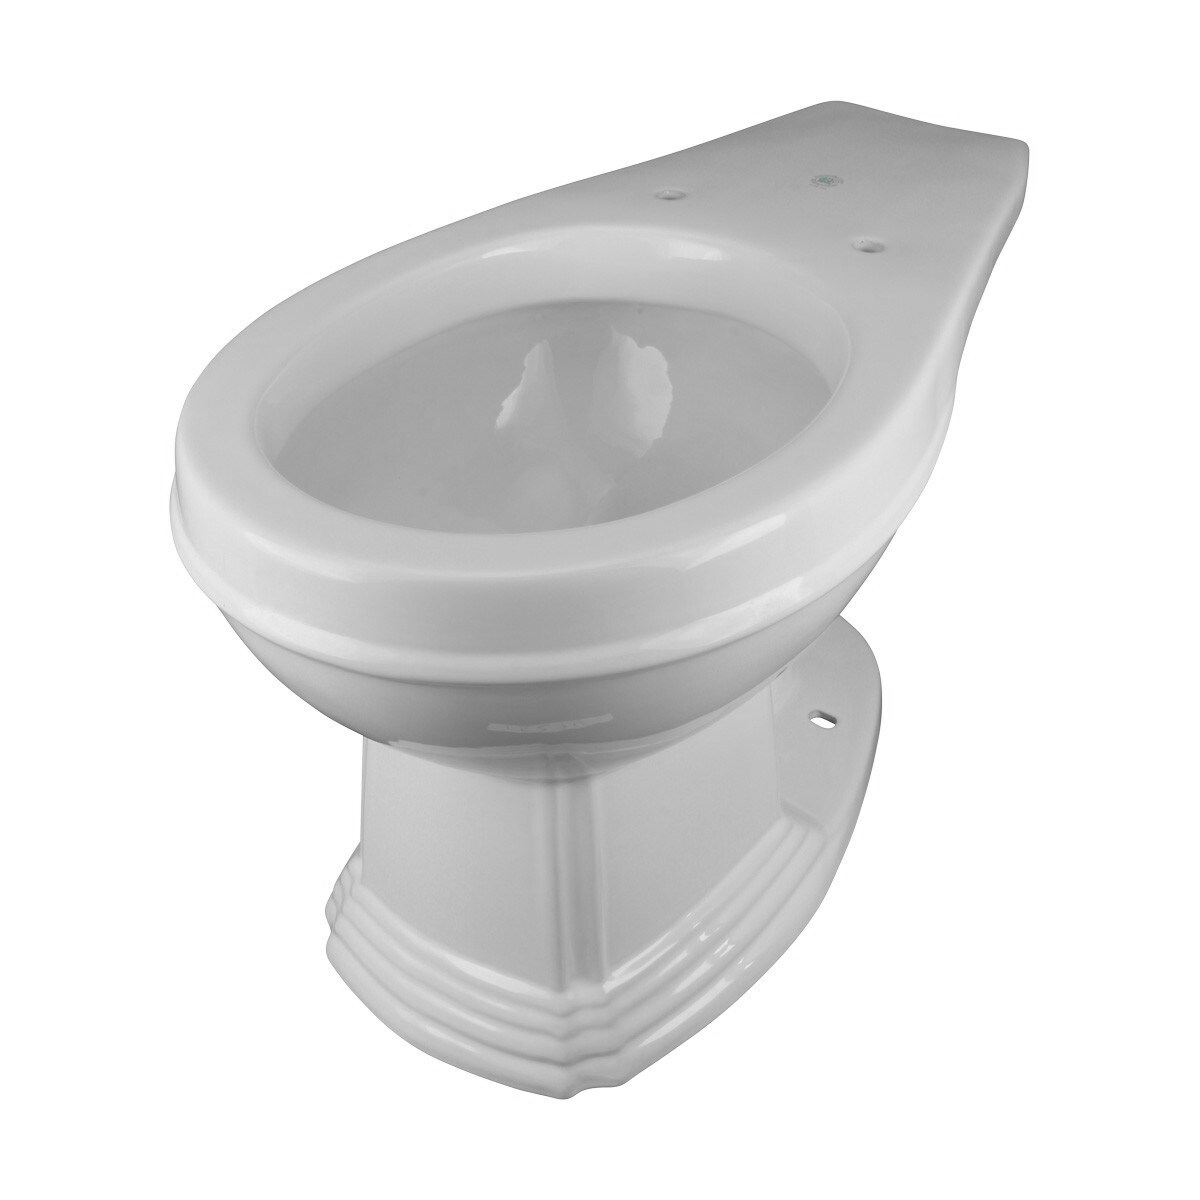 High Tank Toilet Light Oak Finish Wooden Tank Round Rear Entry White Bowl and L Pipes Renovators Supply - N/A